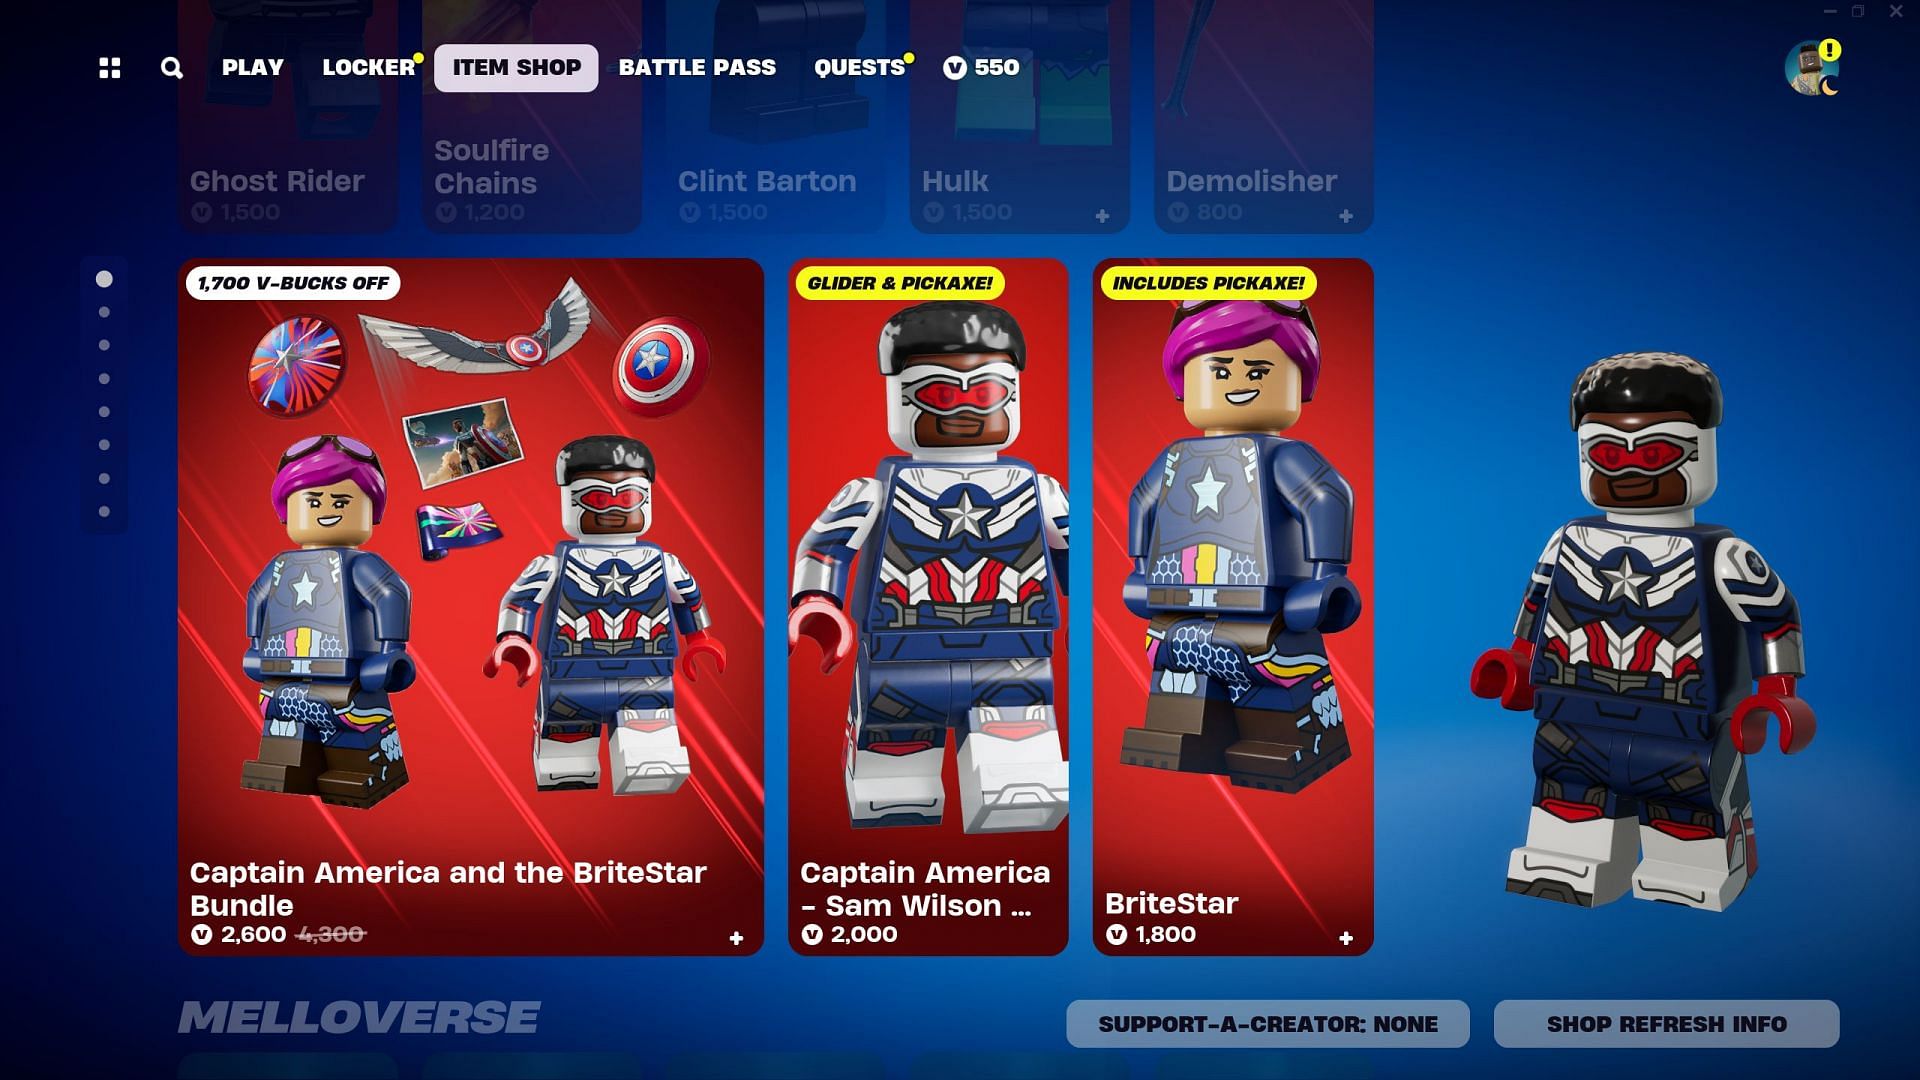 Captain America - Sam Wilson (MCU) and BriteStar Skins are currently listed in the Item Shop. (Image via Epic Games/Fortnite)